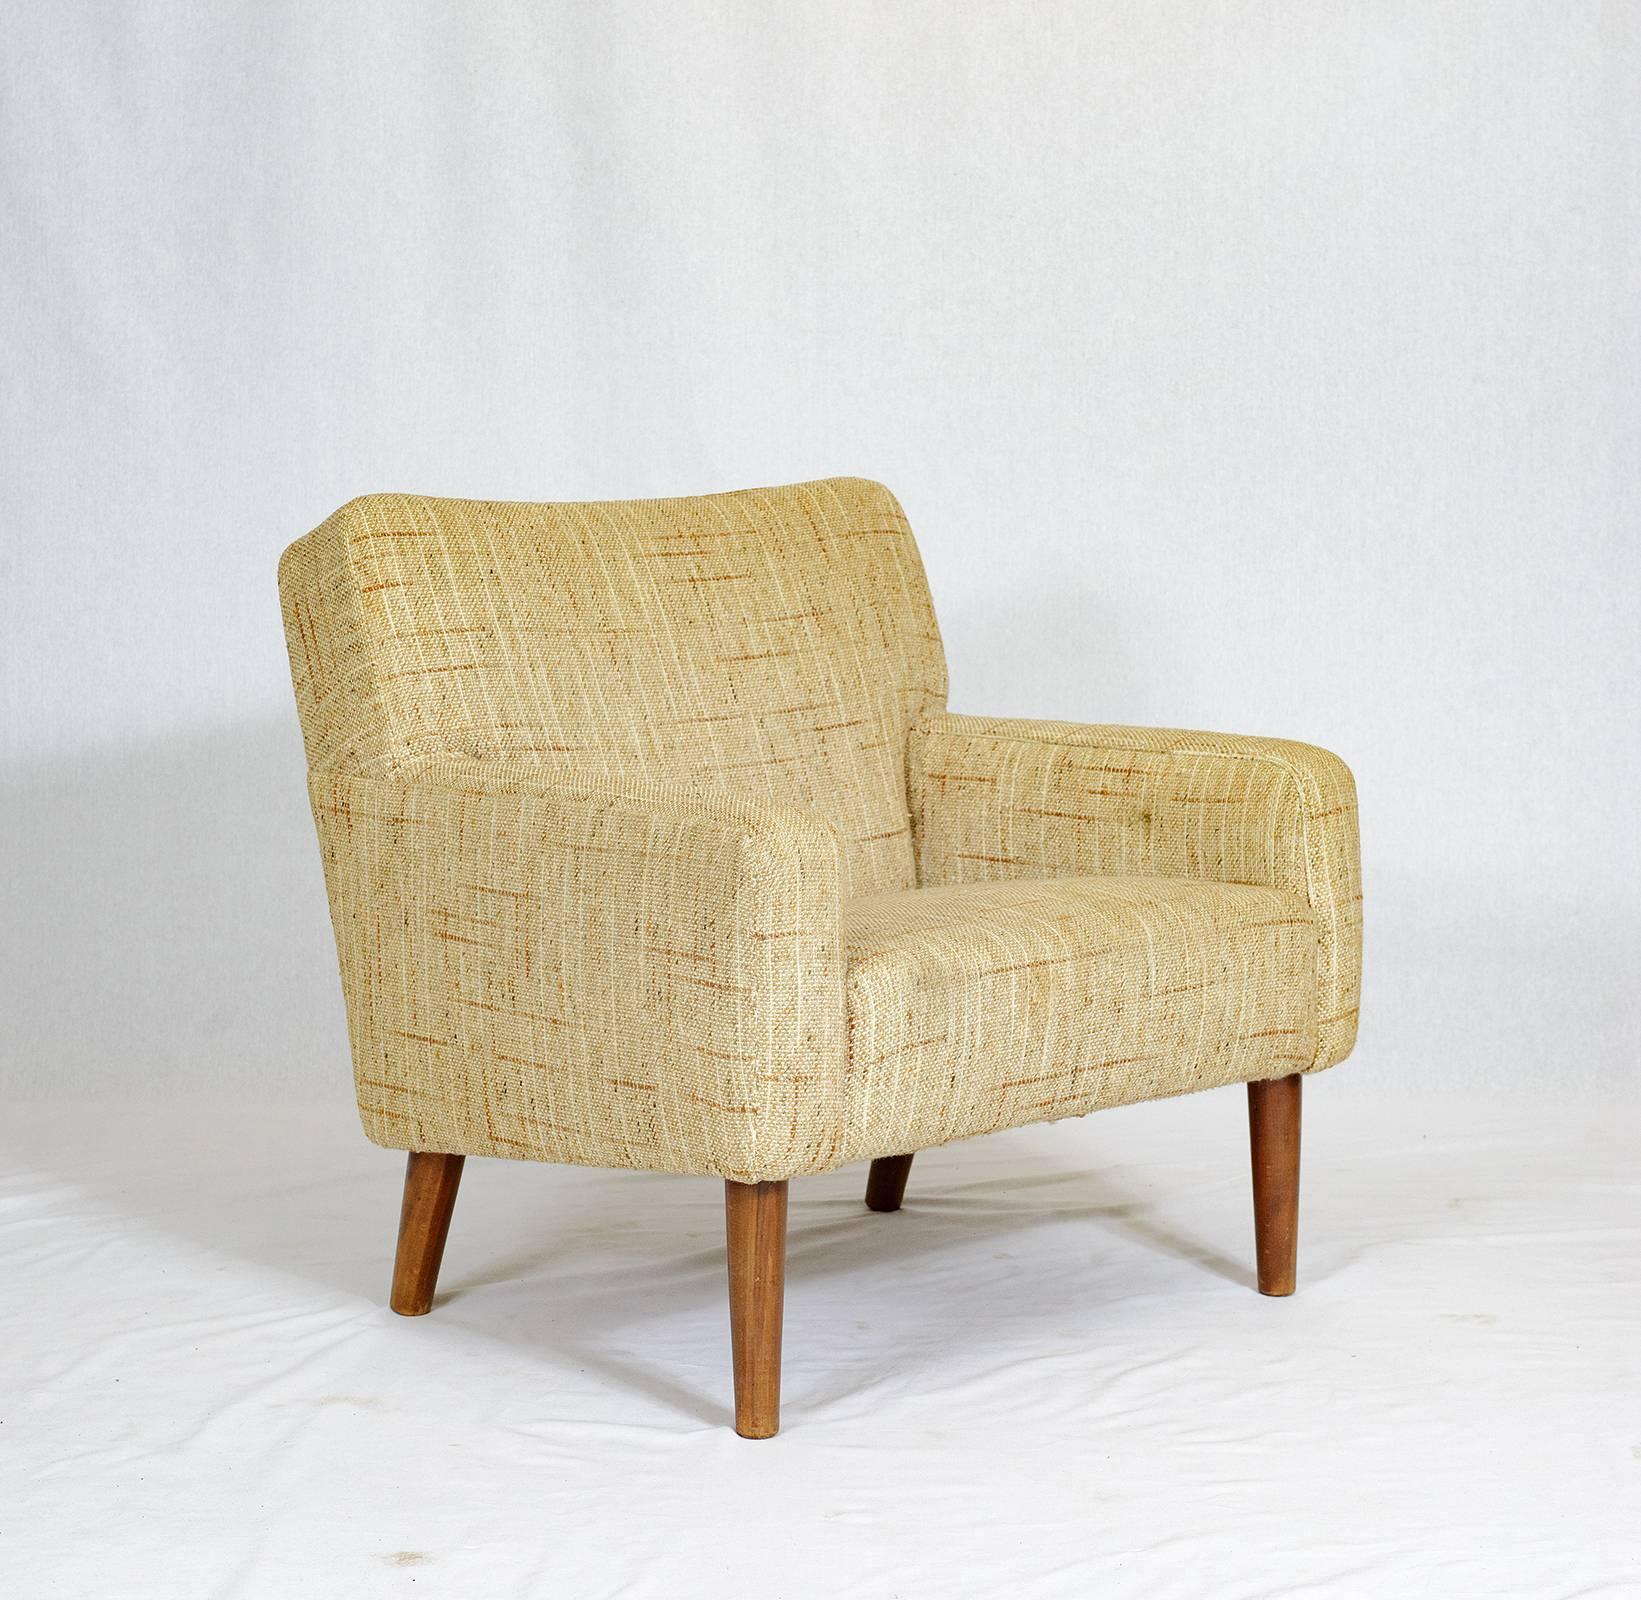 Hans Wegner AP-33 lounge chair designed in the 1950s and produced by 
A.P. Stolen.    Store formerly known as ARTFUL DODGER INC